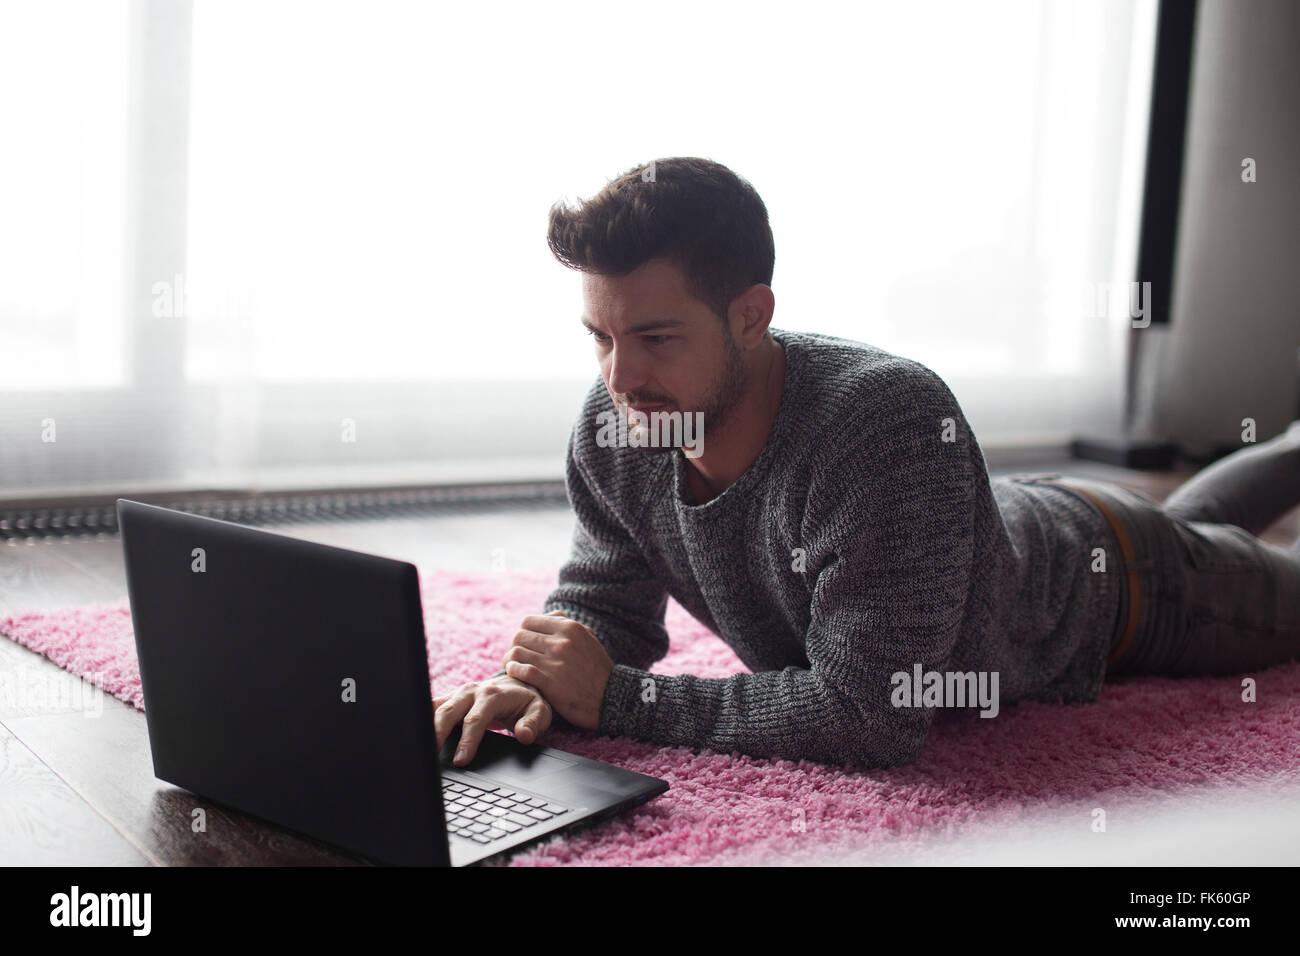 Young man typing on laptop, lie prone on carpet at home Stock Photo